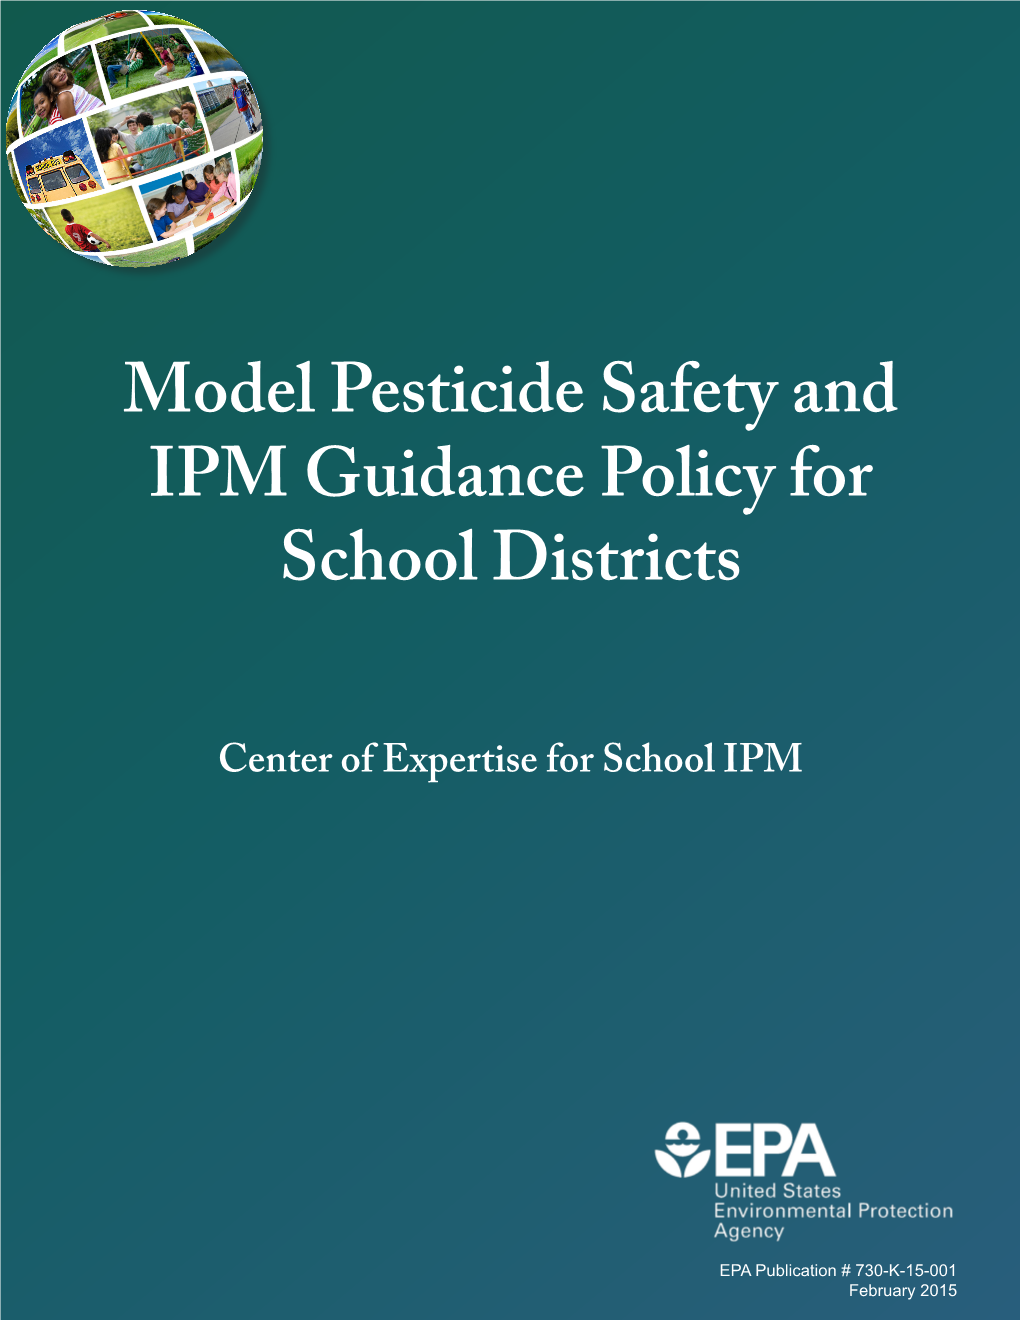 Model Pesticide Safety and IPM Guidance Policy for School Districts